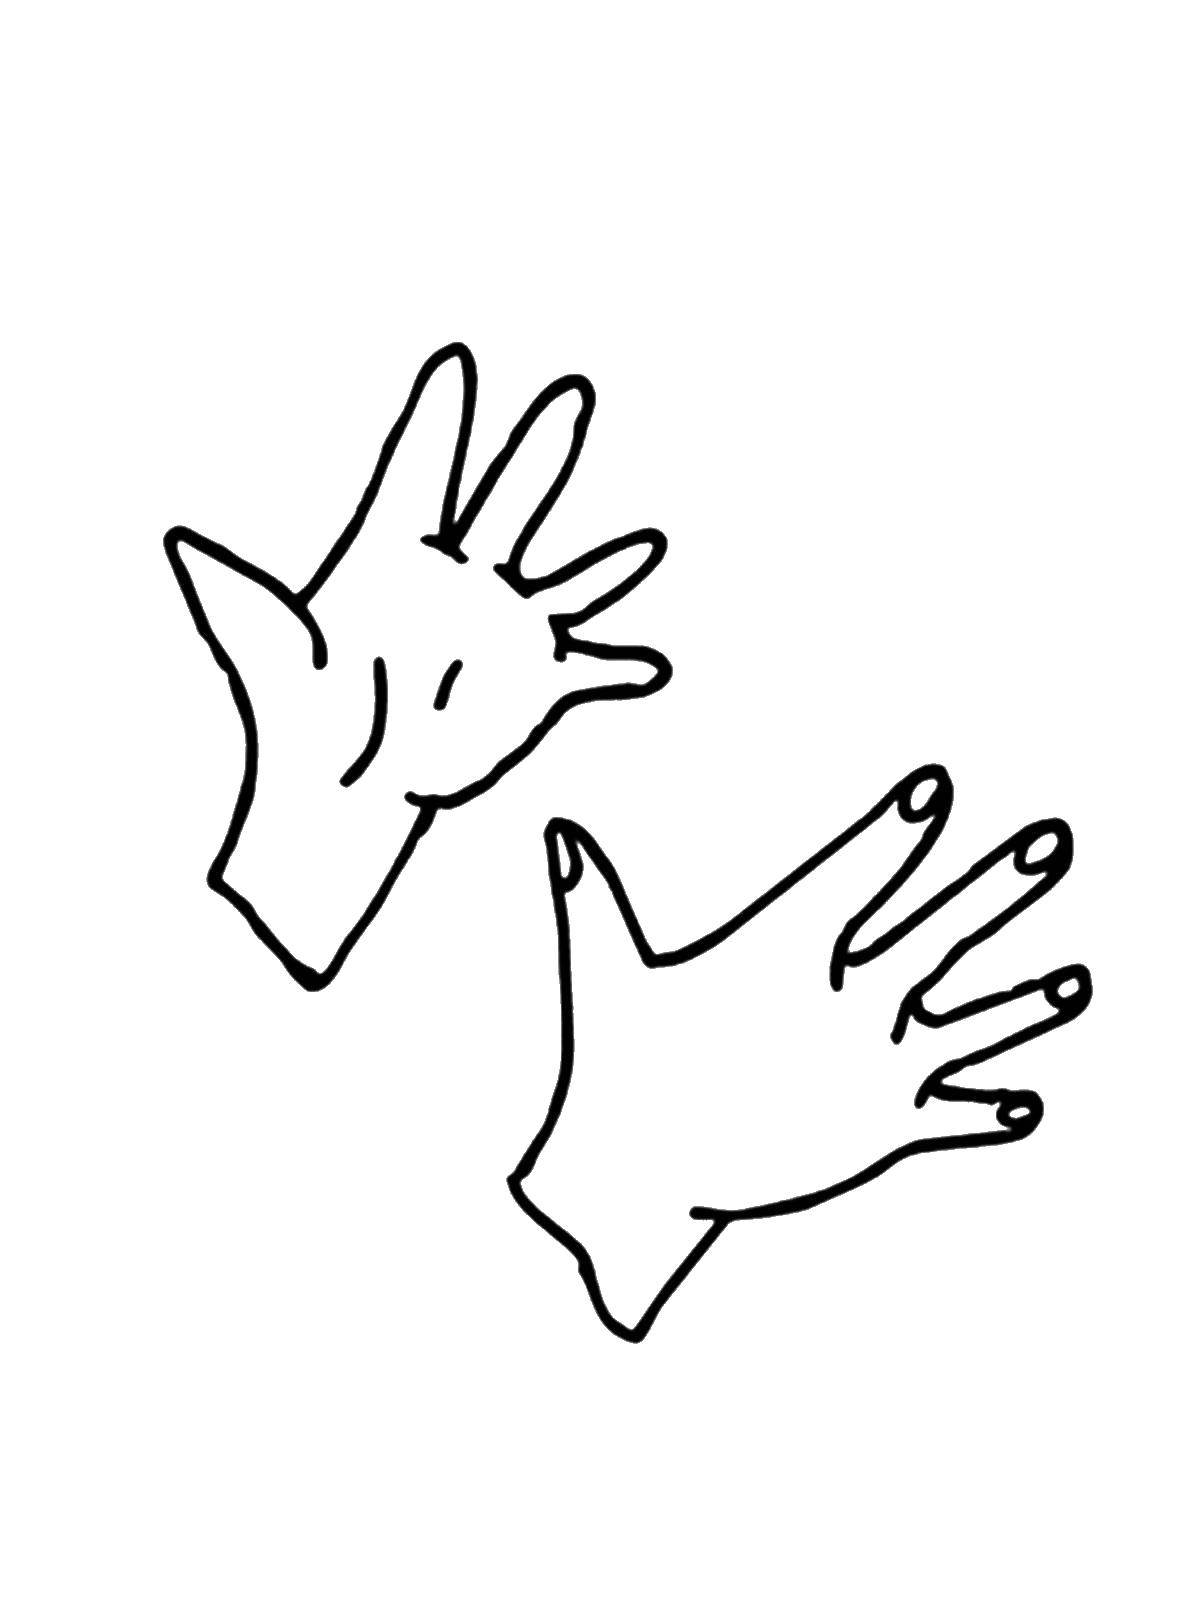 Coloring Hands. Category The structure of the body. Tags:  Hand.